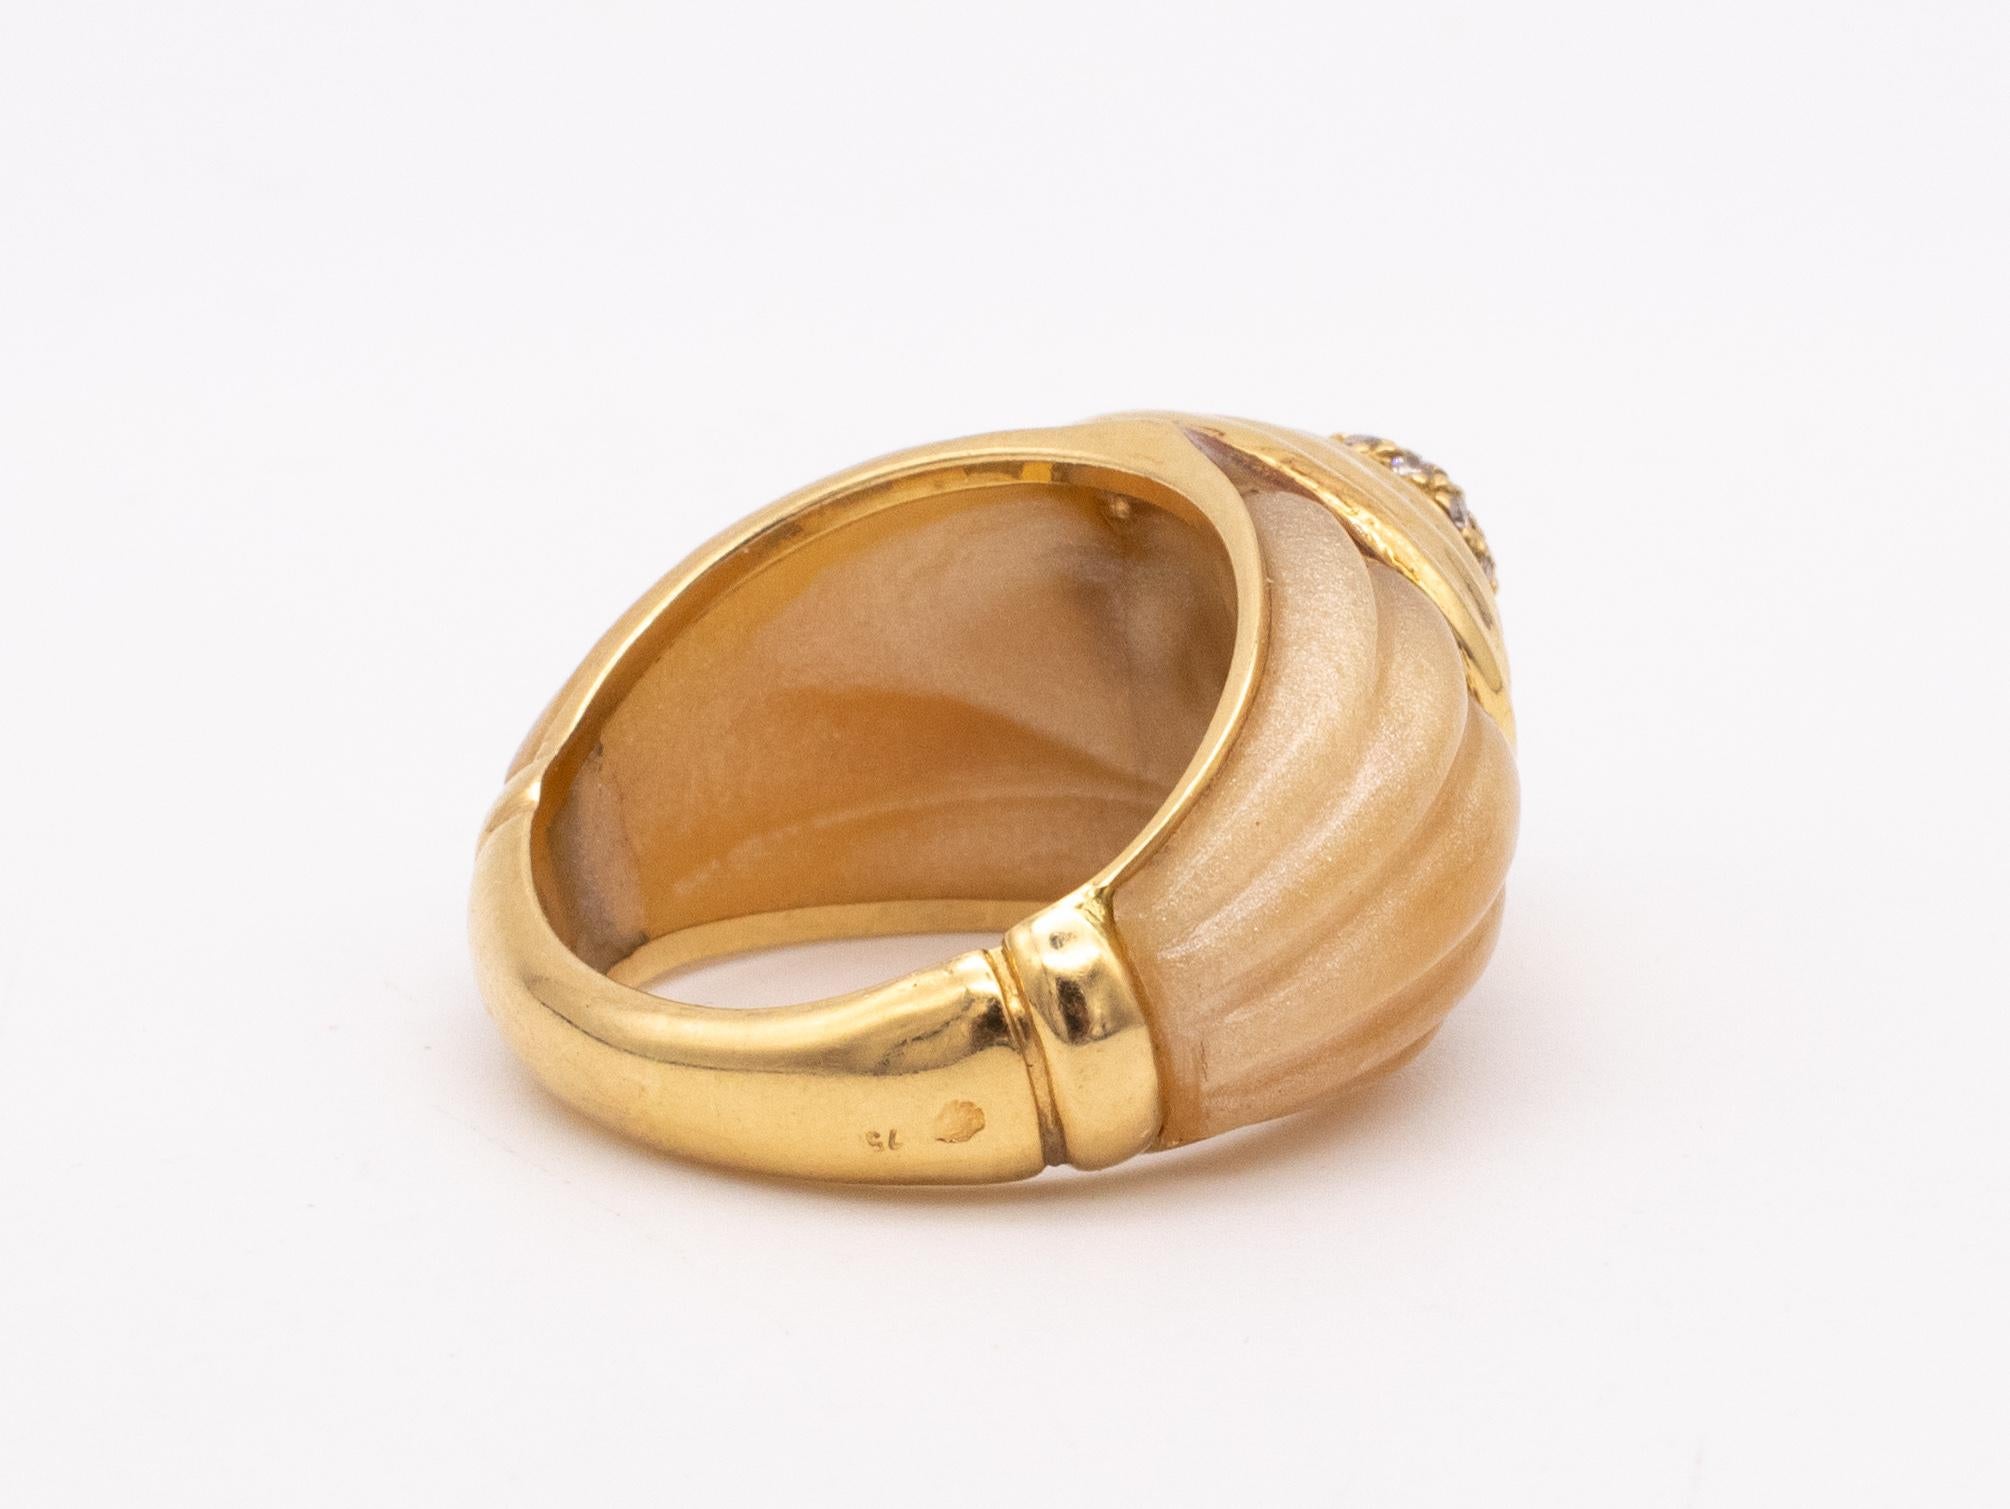 Women's French 1960 Art Deco Retro Bakelite Cocktail Ring in 18Kt Gold with Diamonds